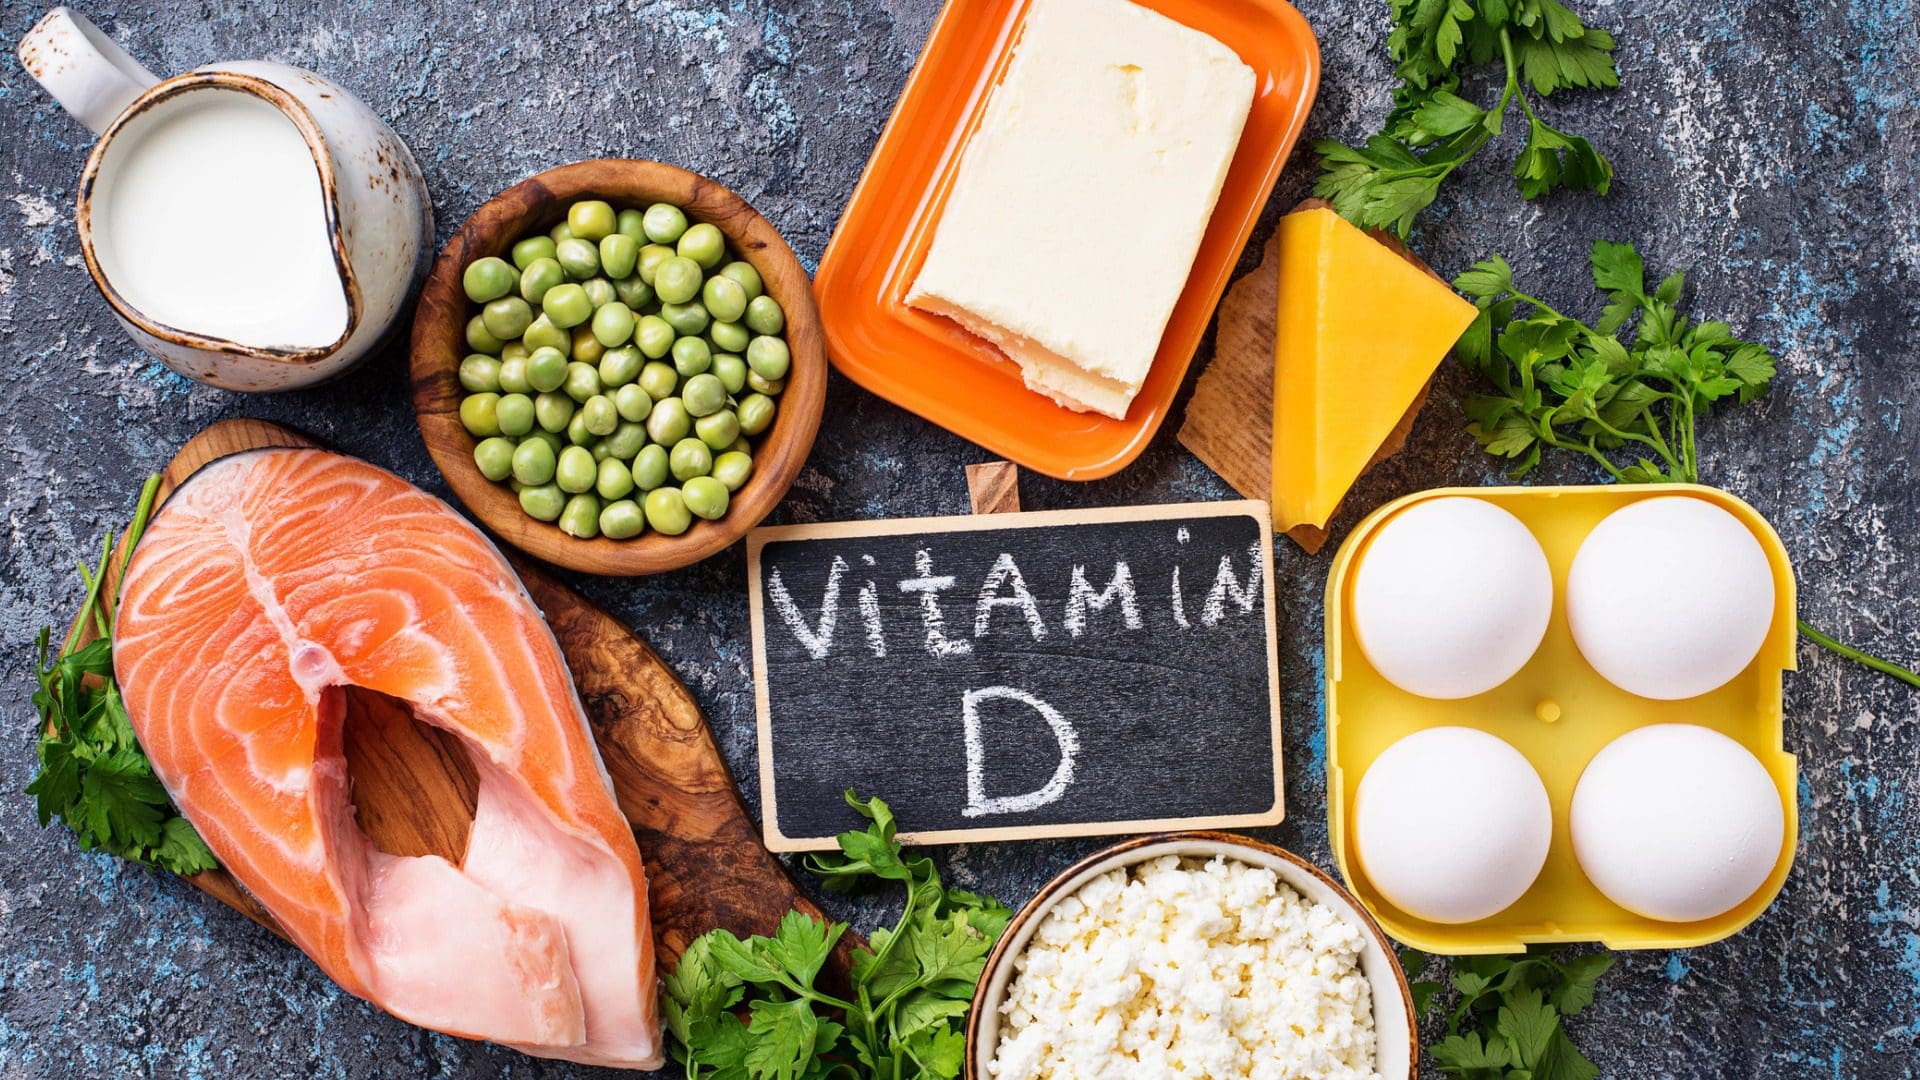 new-study-claims-to-show-vitamin-d-doesn’t-help-against-covid.-here’s-what-they-did-wrong